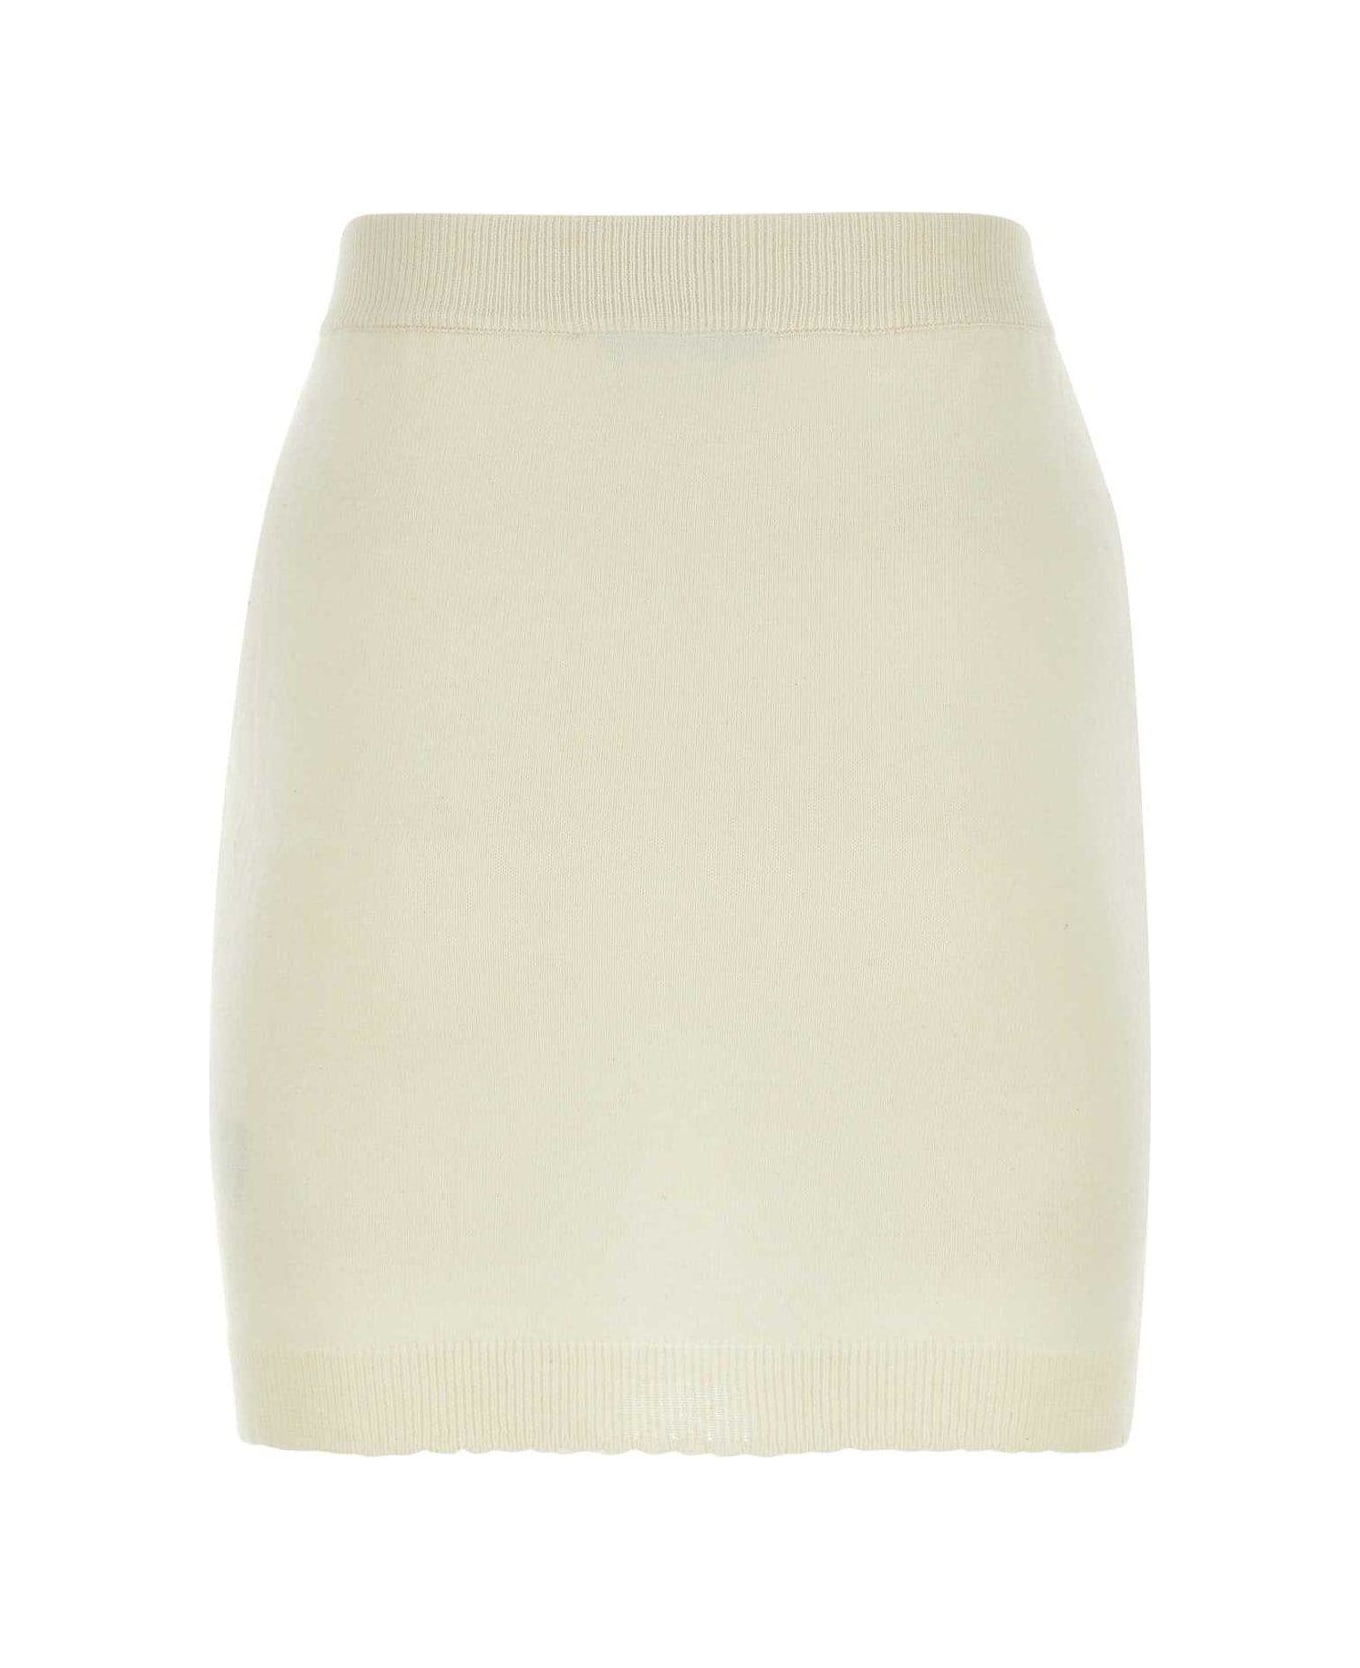 Vivienne Westwood Orb-embroidered Scallop Hem Knitted Mini Skirt - Cream